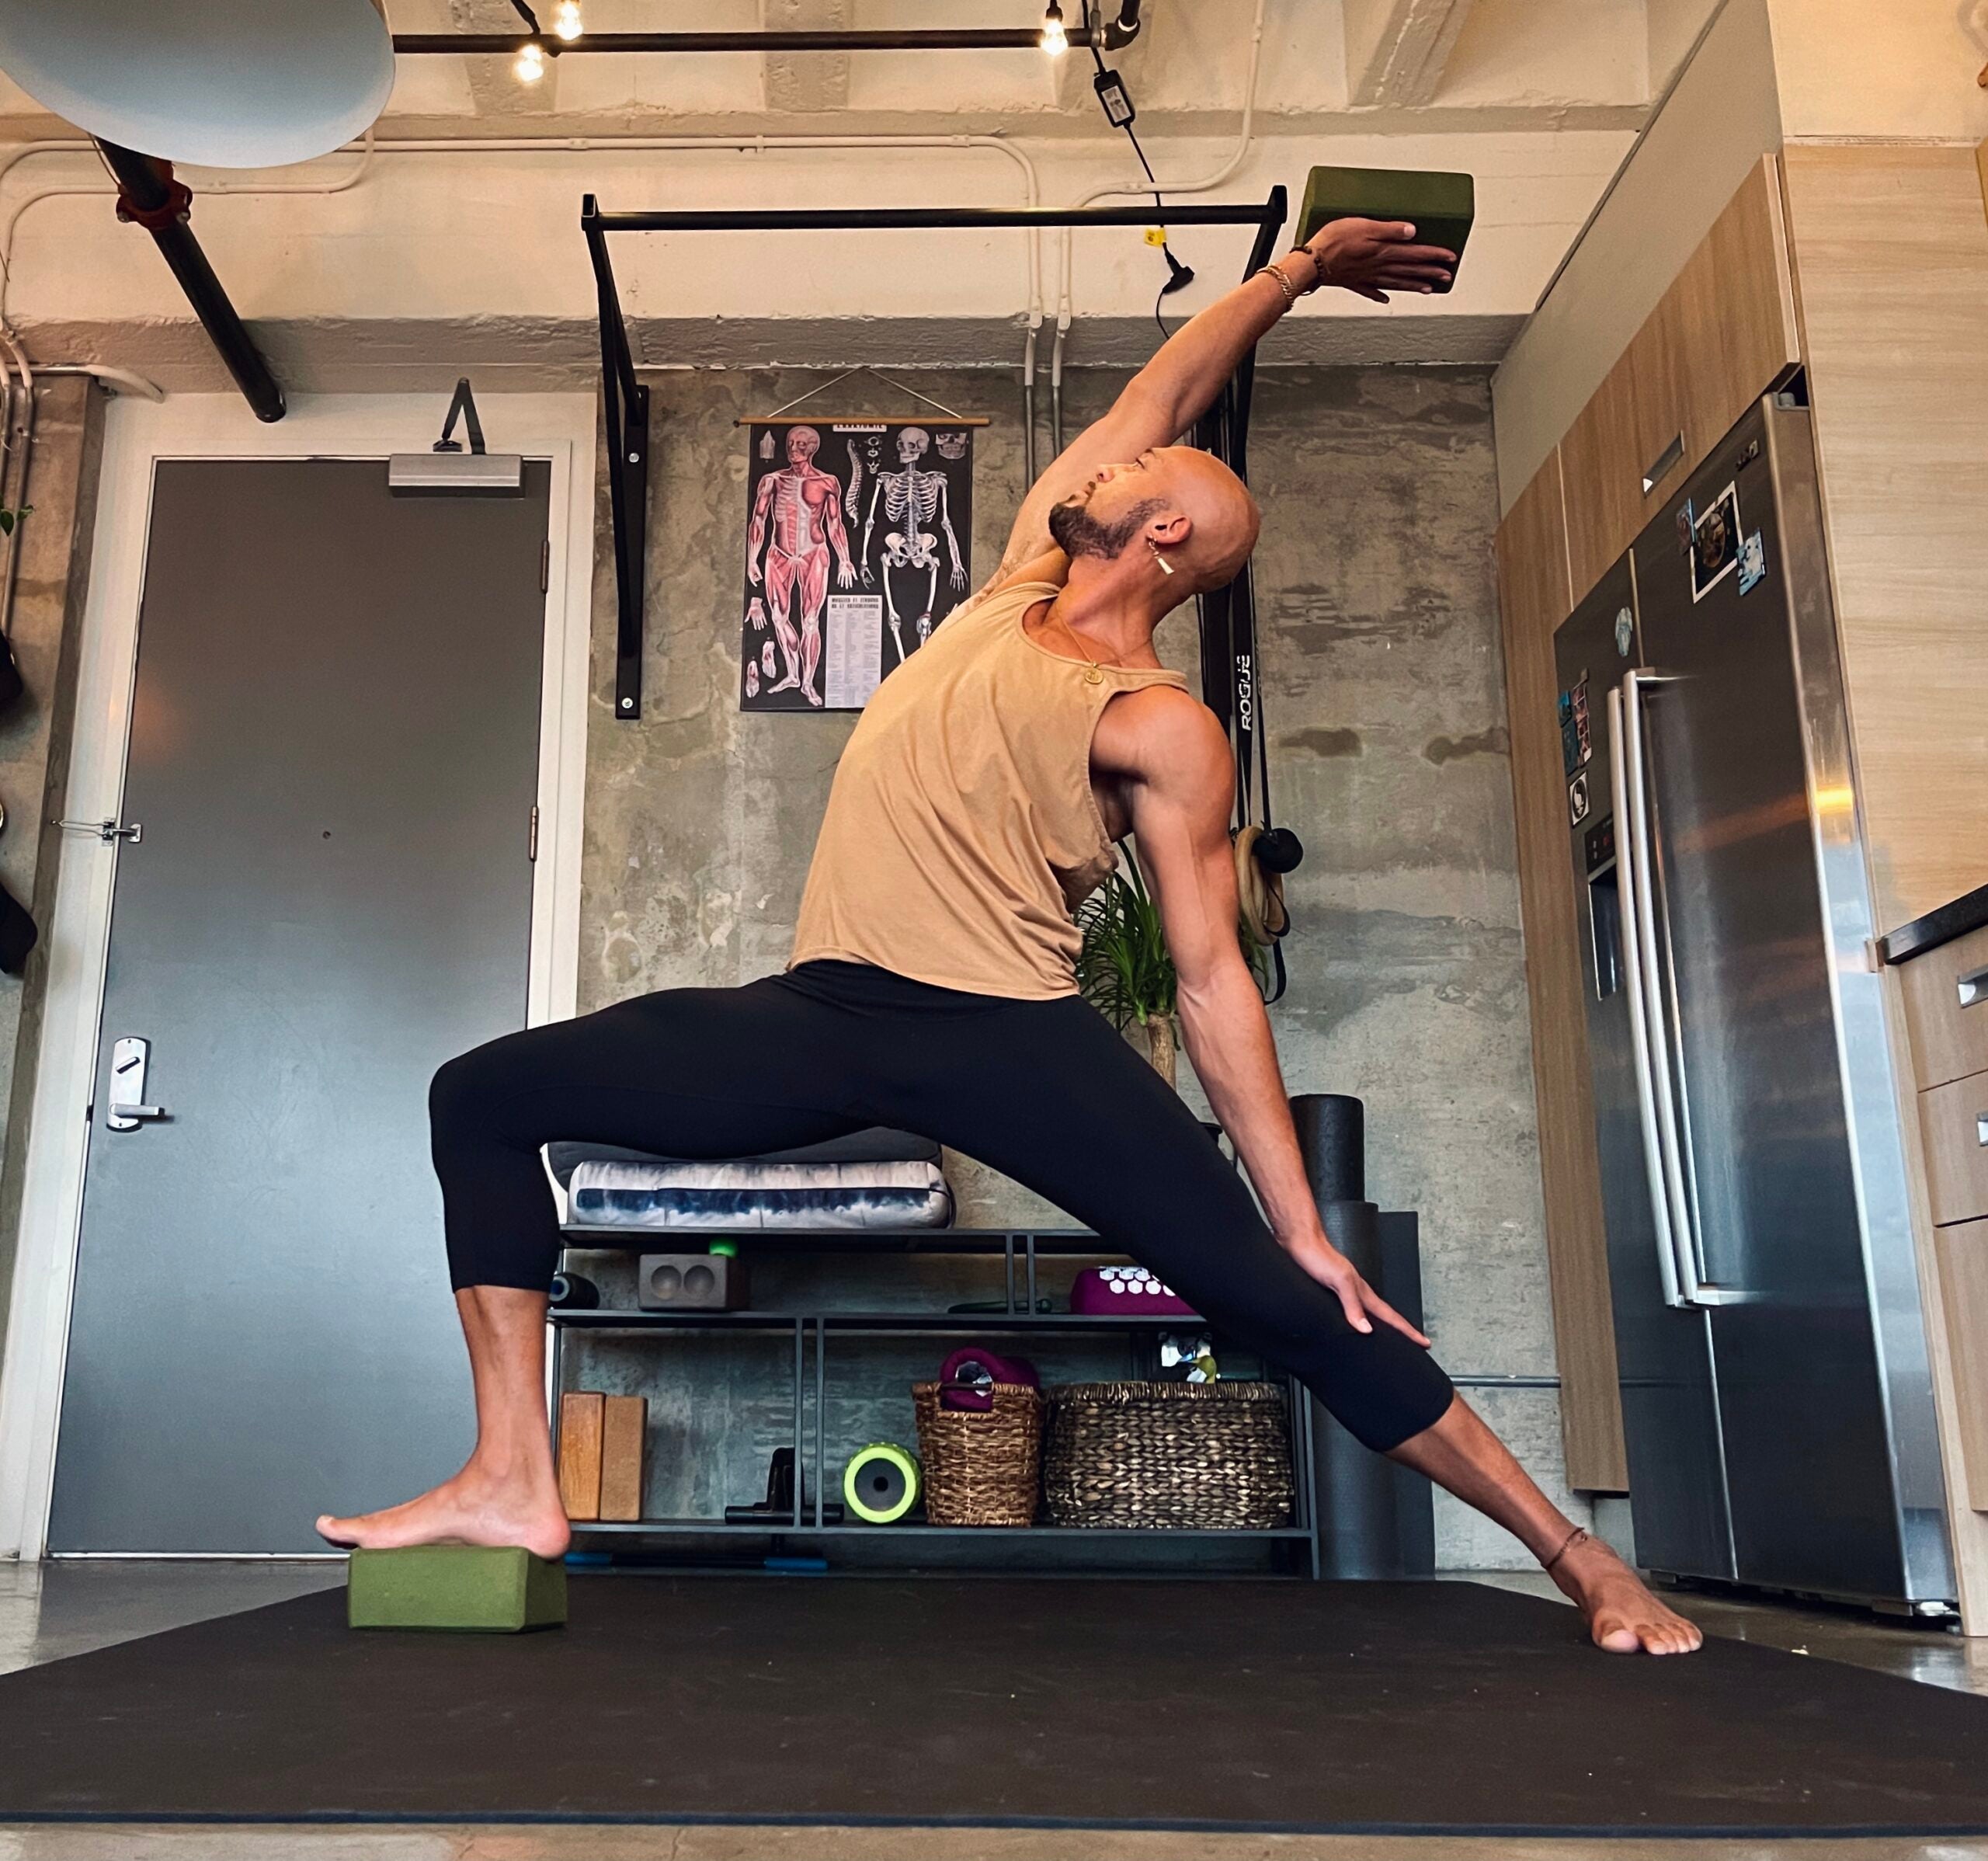 The Lowdown on Yoga Props and how to Incorporate Them - Momoyoga